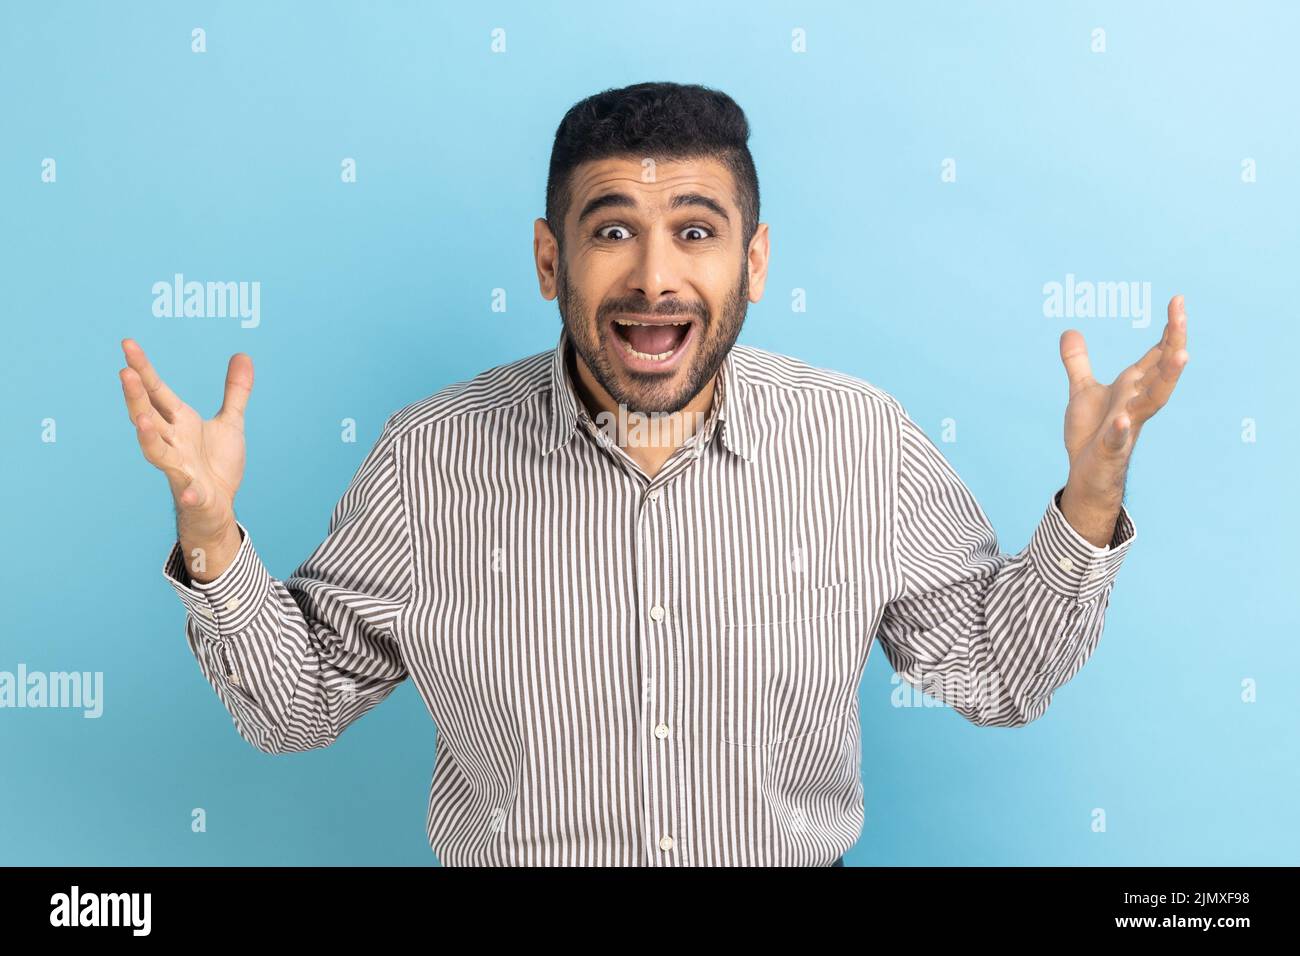 Irritated annoyed businessman with beard has problems, gesticulating with hands, crisis and negativity, misunderstanding, wearing striped shirt. Indoor studio shot isolated on blue background. Stock Photo